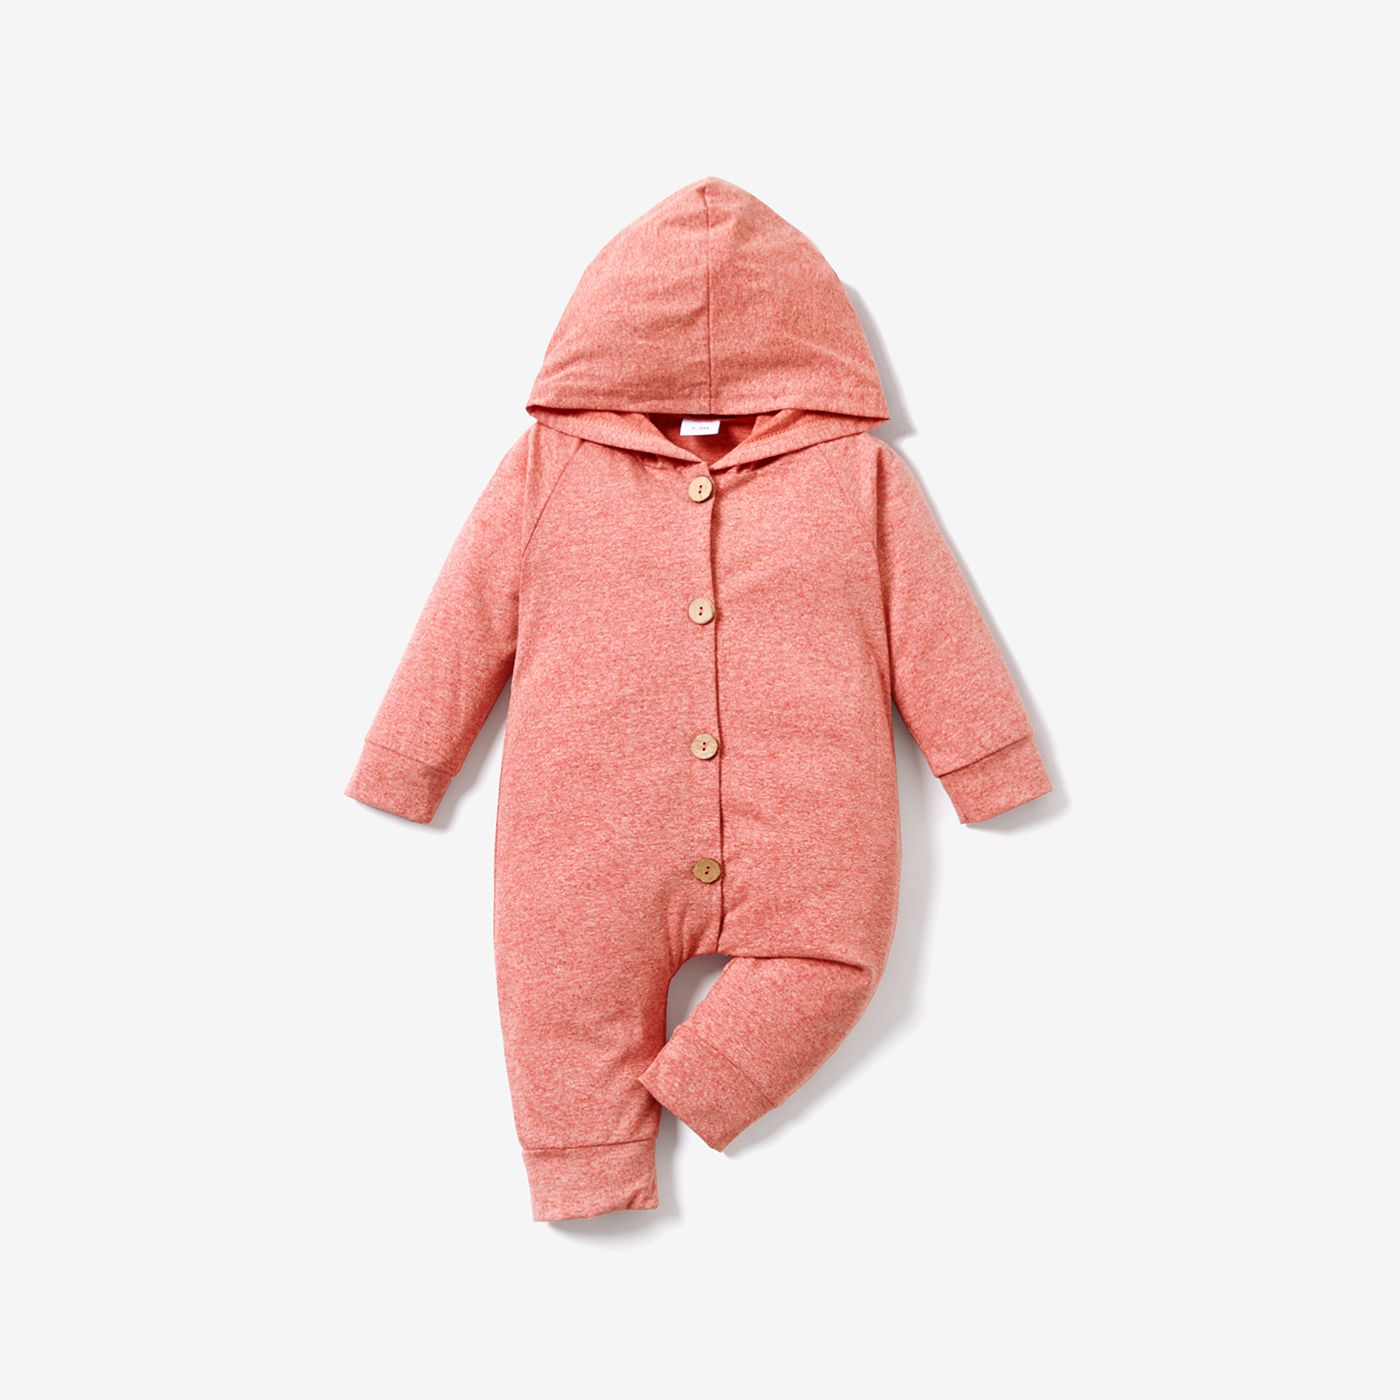 Solid Hooded Long-sleeve Baby Jumpsuit